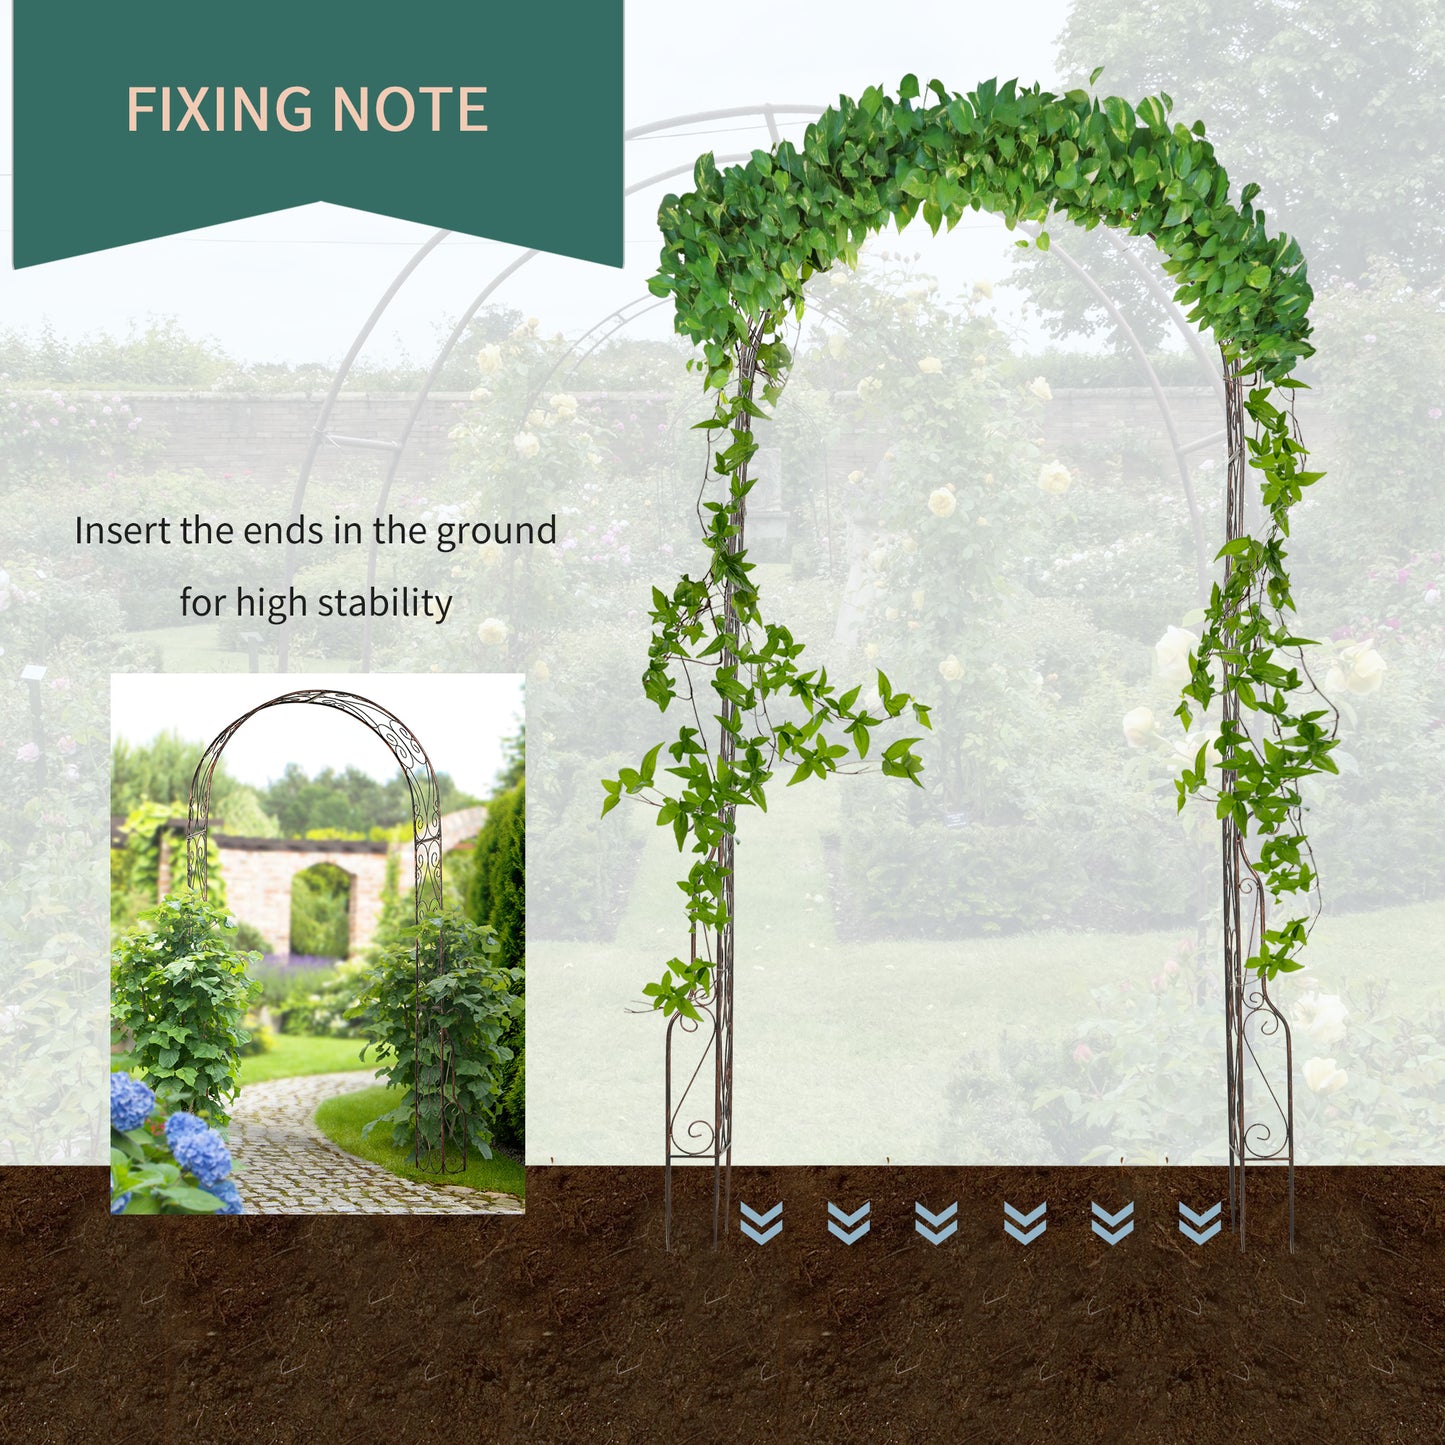 Outsunny Metal Decorative Garden Rose Arch Arbour Trellis for Climbing Plants Support Archway Wedding Gate 120L x 30W x 226H (cm)